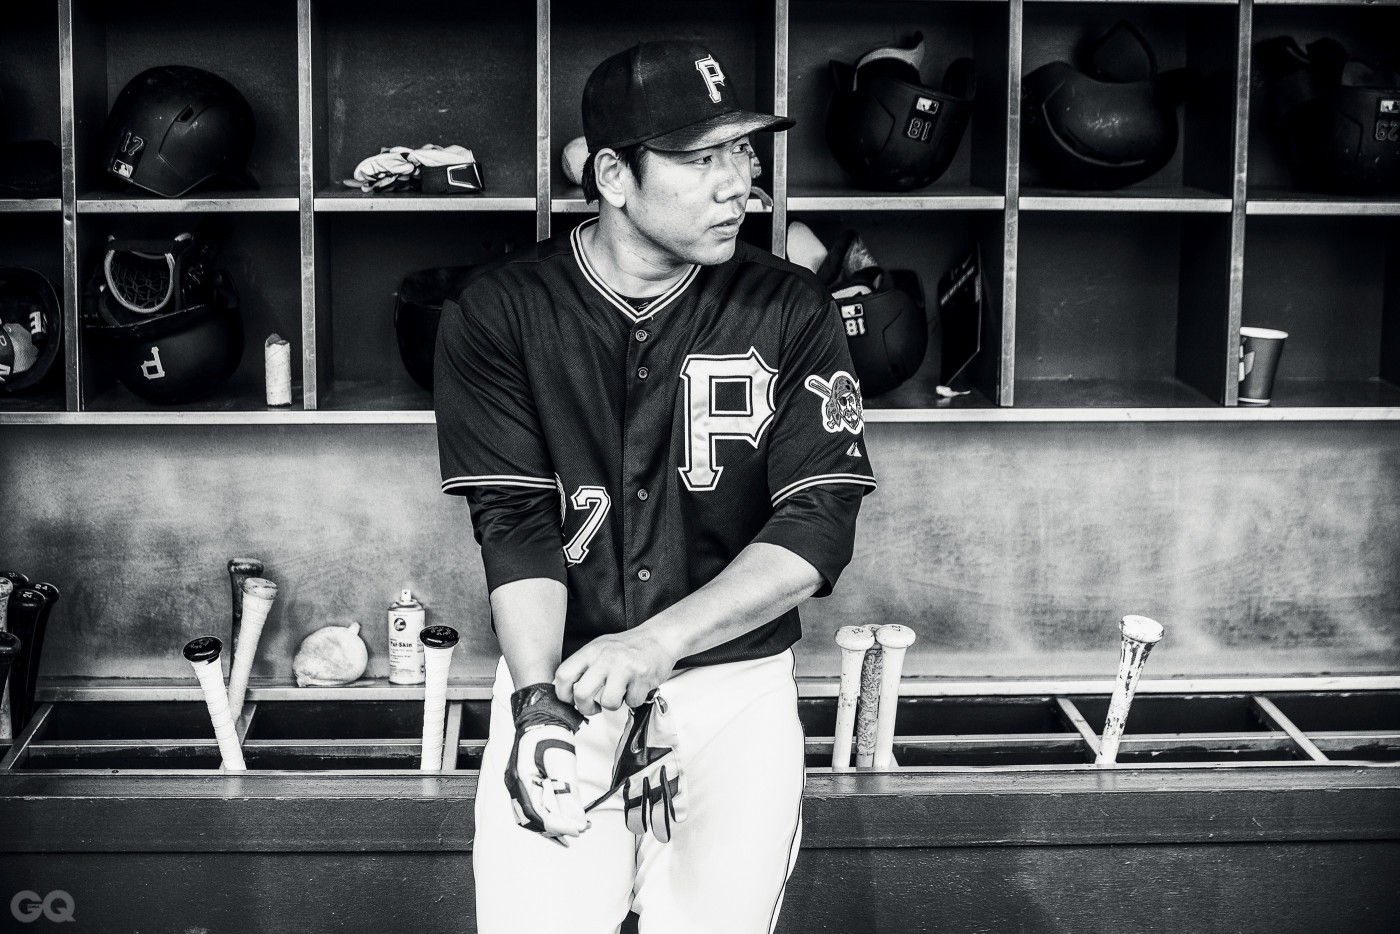 PITTSBURGH, PA - AUGUST 21: (EDITORS NOTE: Image has been converted to black and white) Jung Ho Kang #27 of the Pittsburgh Pirates looks on before the game against the San Francisco Giants at PNC Park on August 21, 2015 in Pittsburgh,Pennsylvania. (Photo by Rob Tringali/SportsChrome/Getty Images)